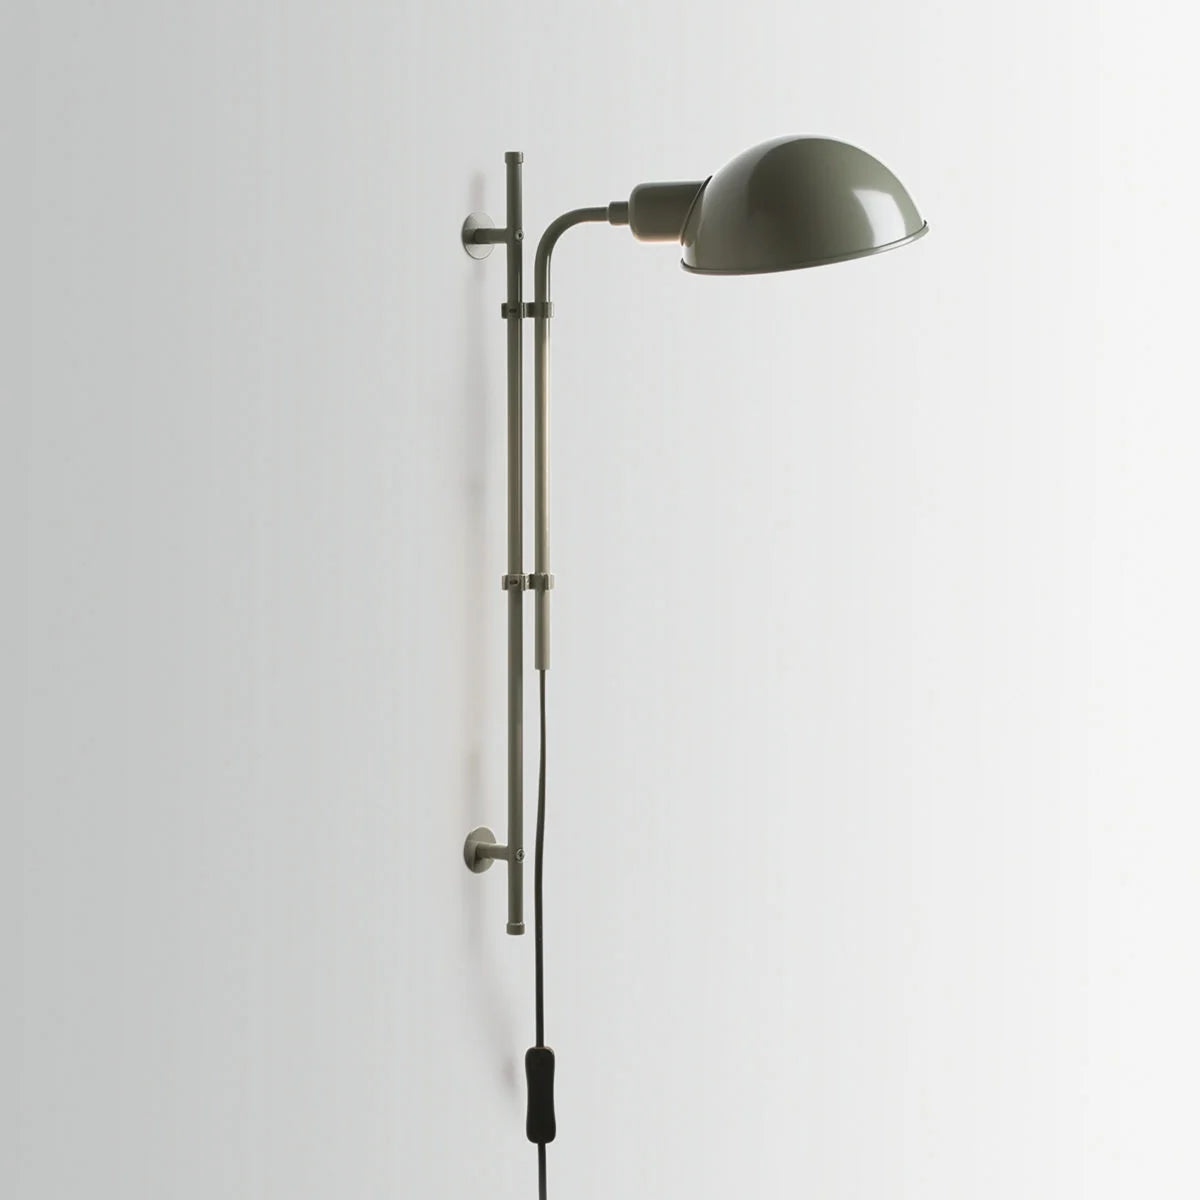 industrial grey Practical Wall lamps Task light for Bedroom , Study room by Marset, Spain 